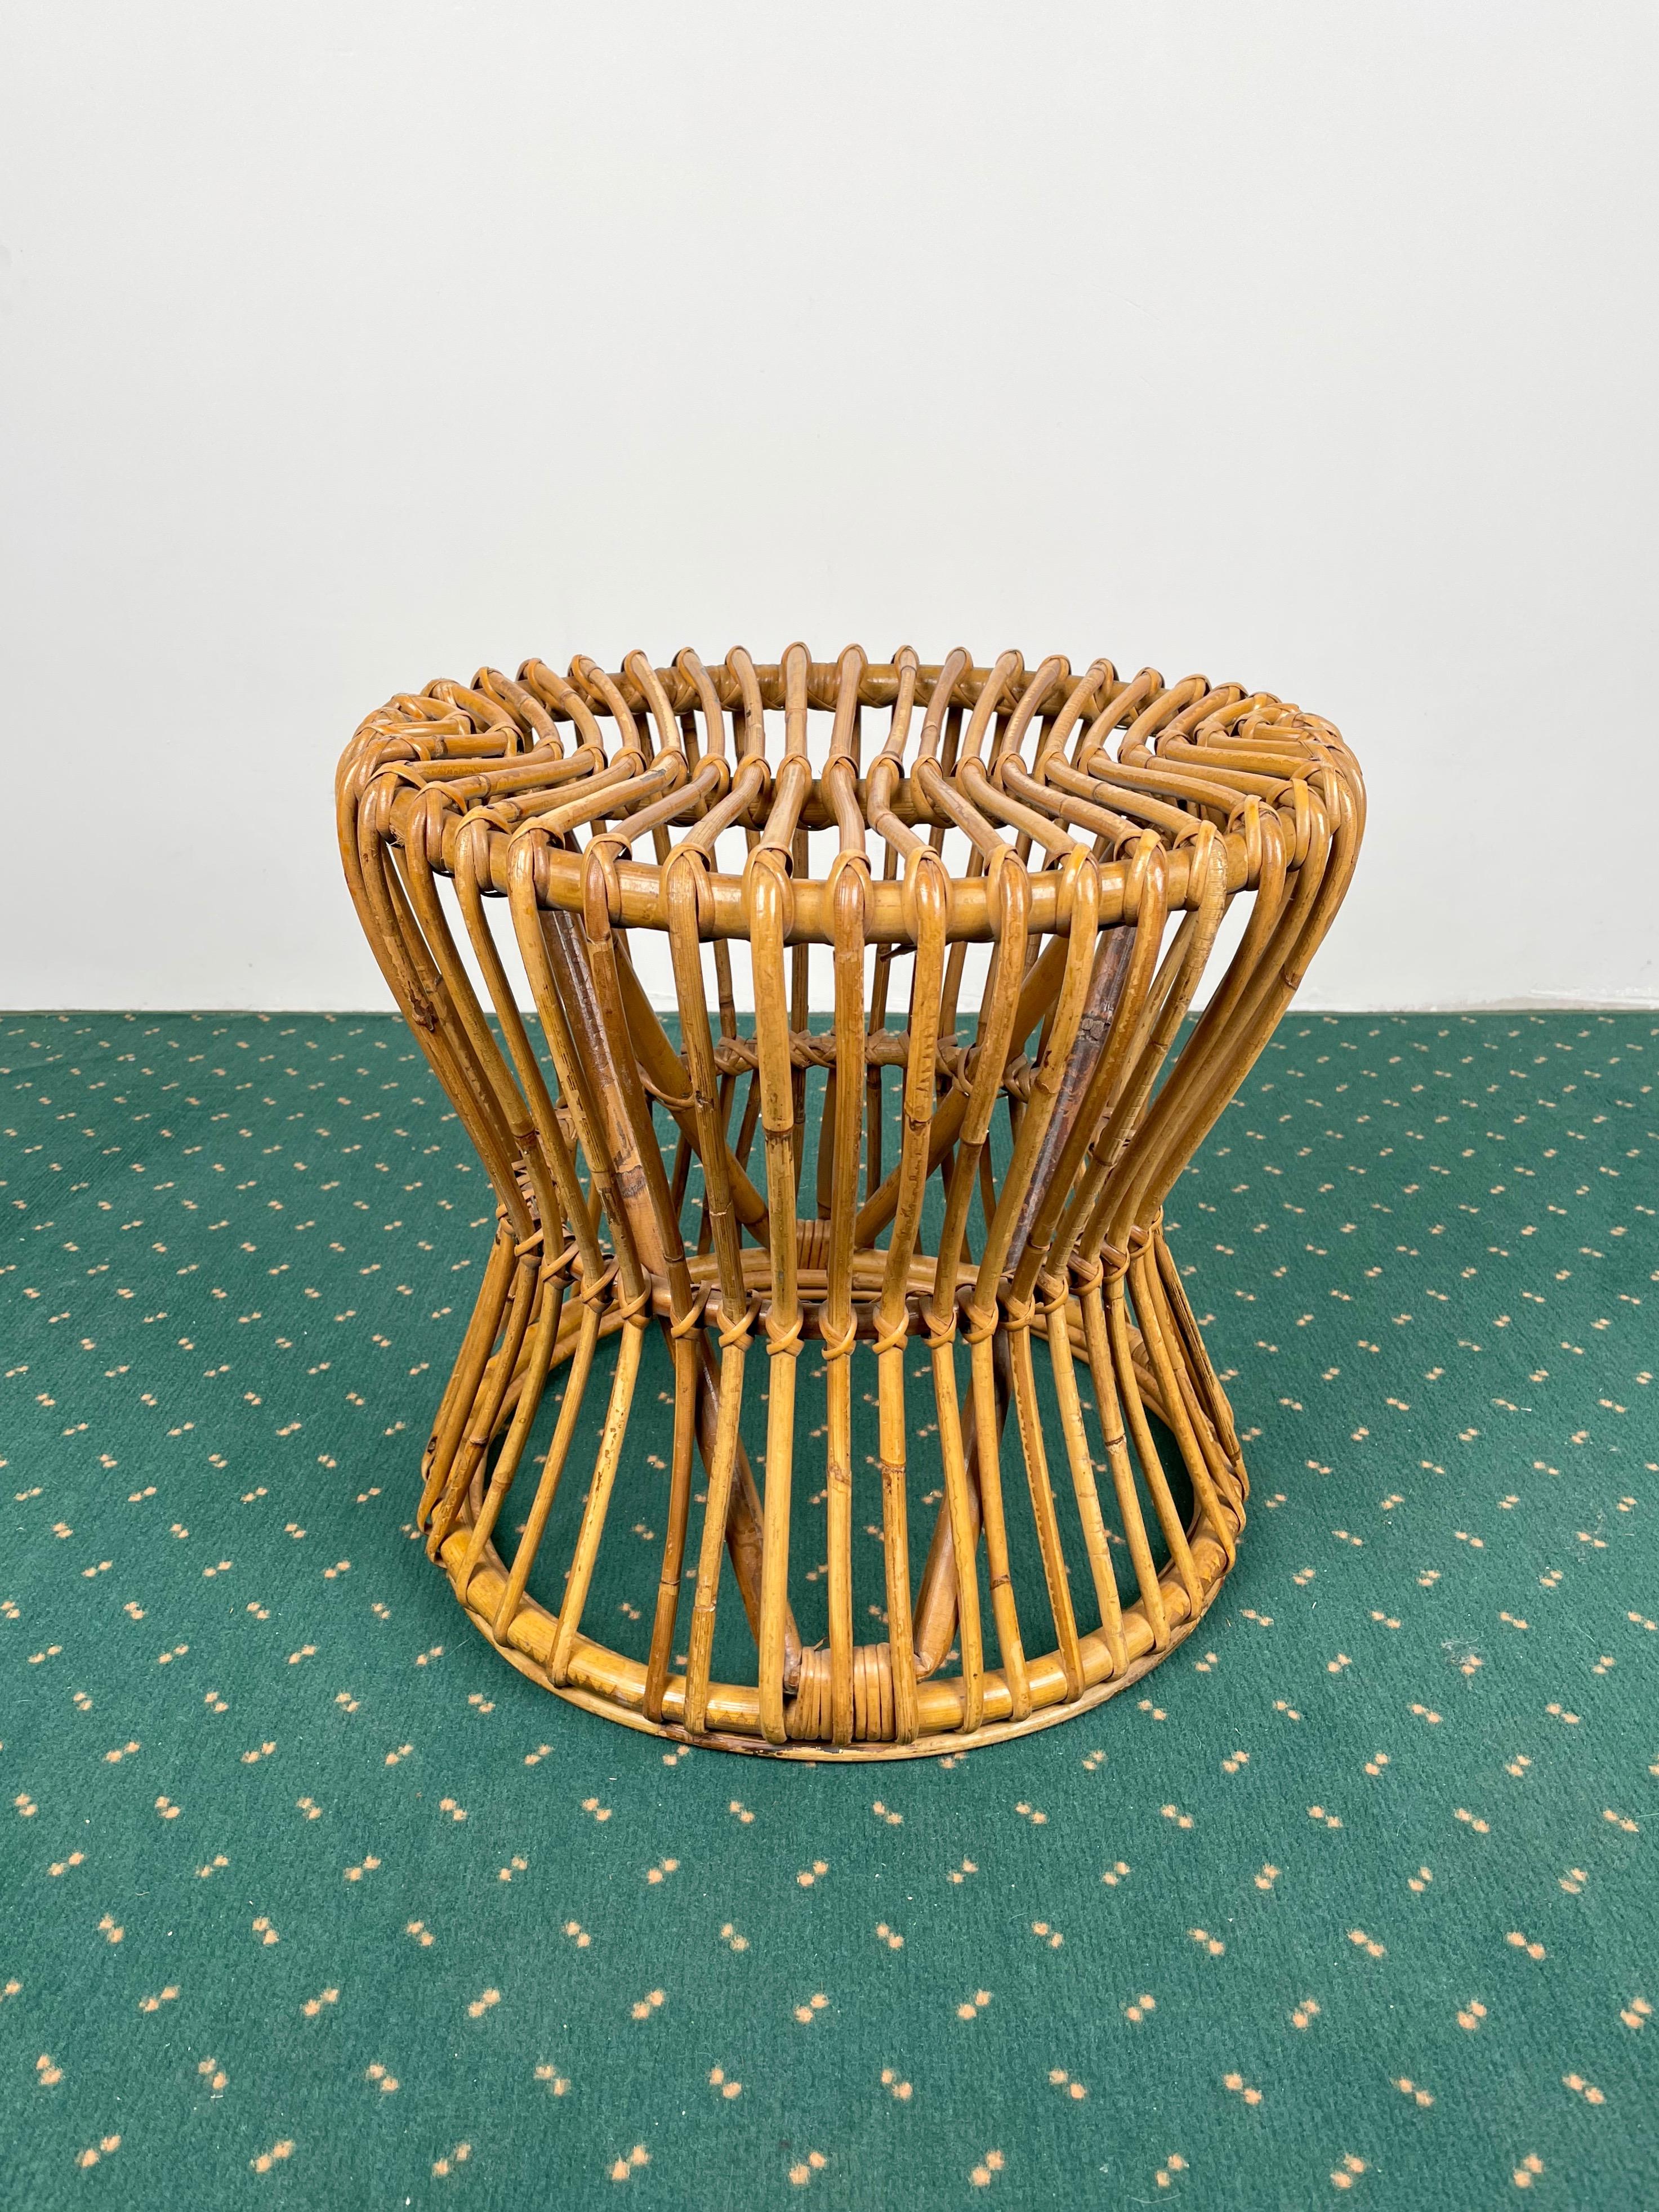 Mid-Century Modern Bamboo Rattan Round Stool, Italy, 1960s For Sale 1